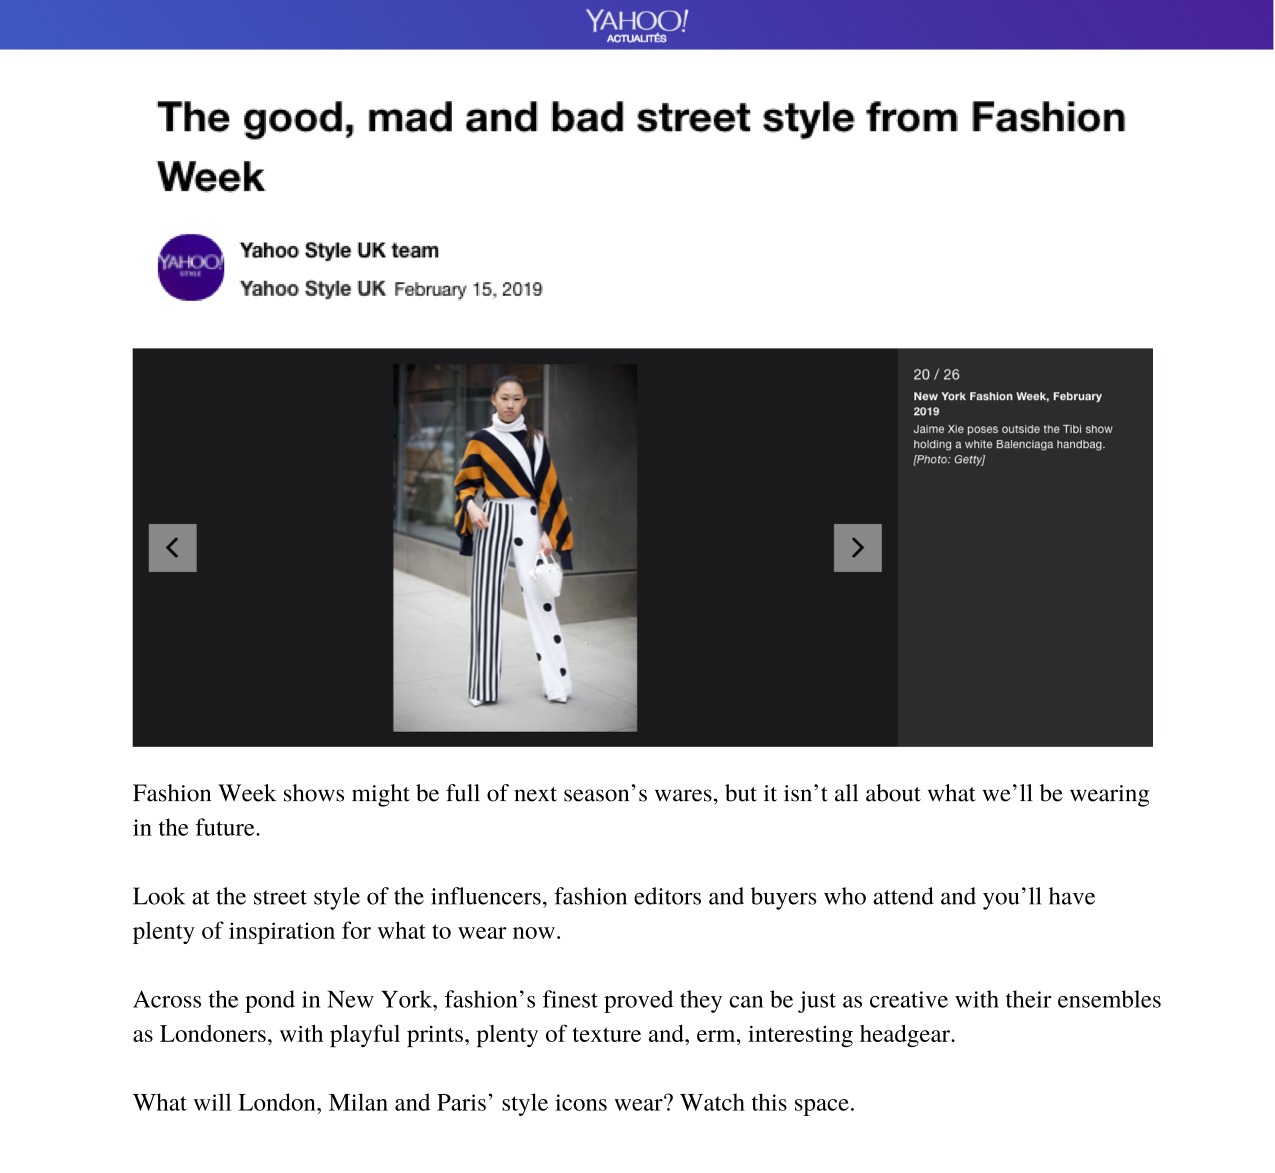 Yahoo UK: The Good, Mad, and Bad Street Style From Fashion Week